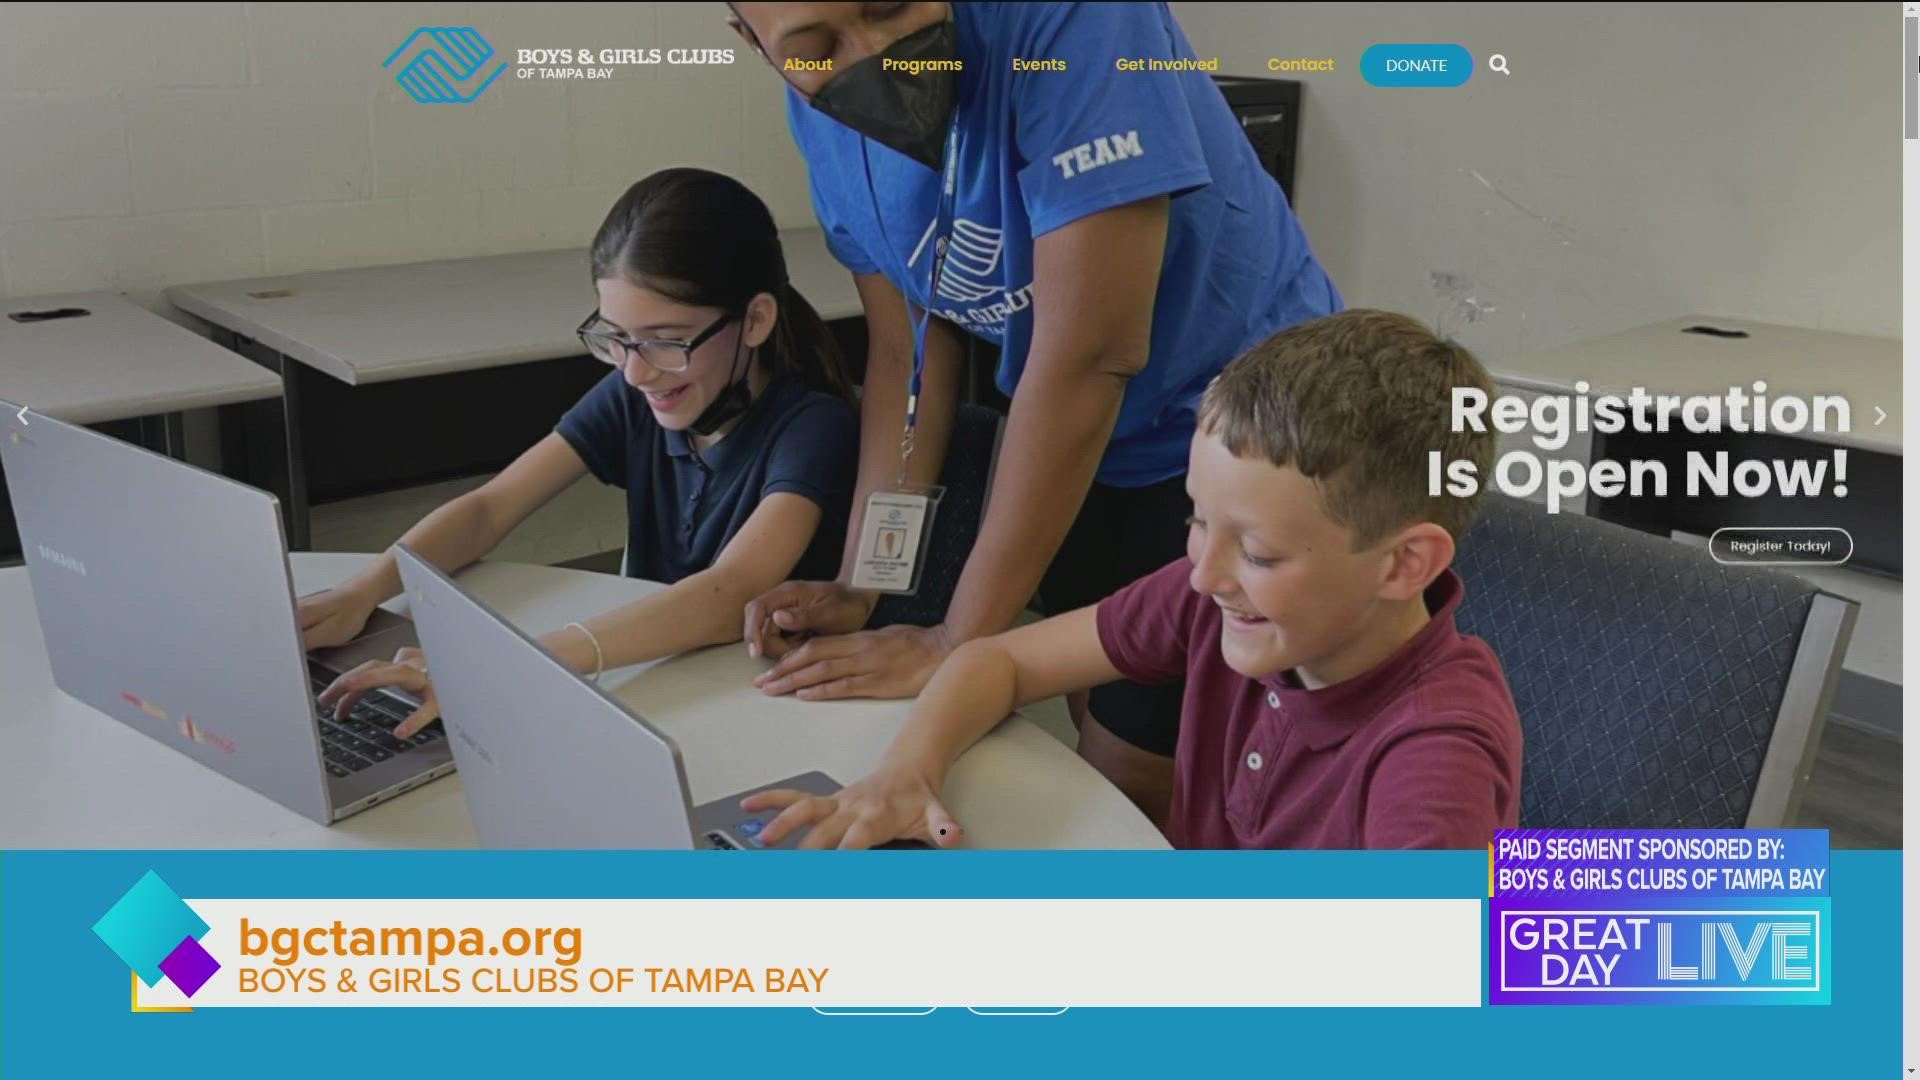 Paid segment sponsored by the Boys and Girls clubs of Tampa Bay.